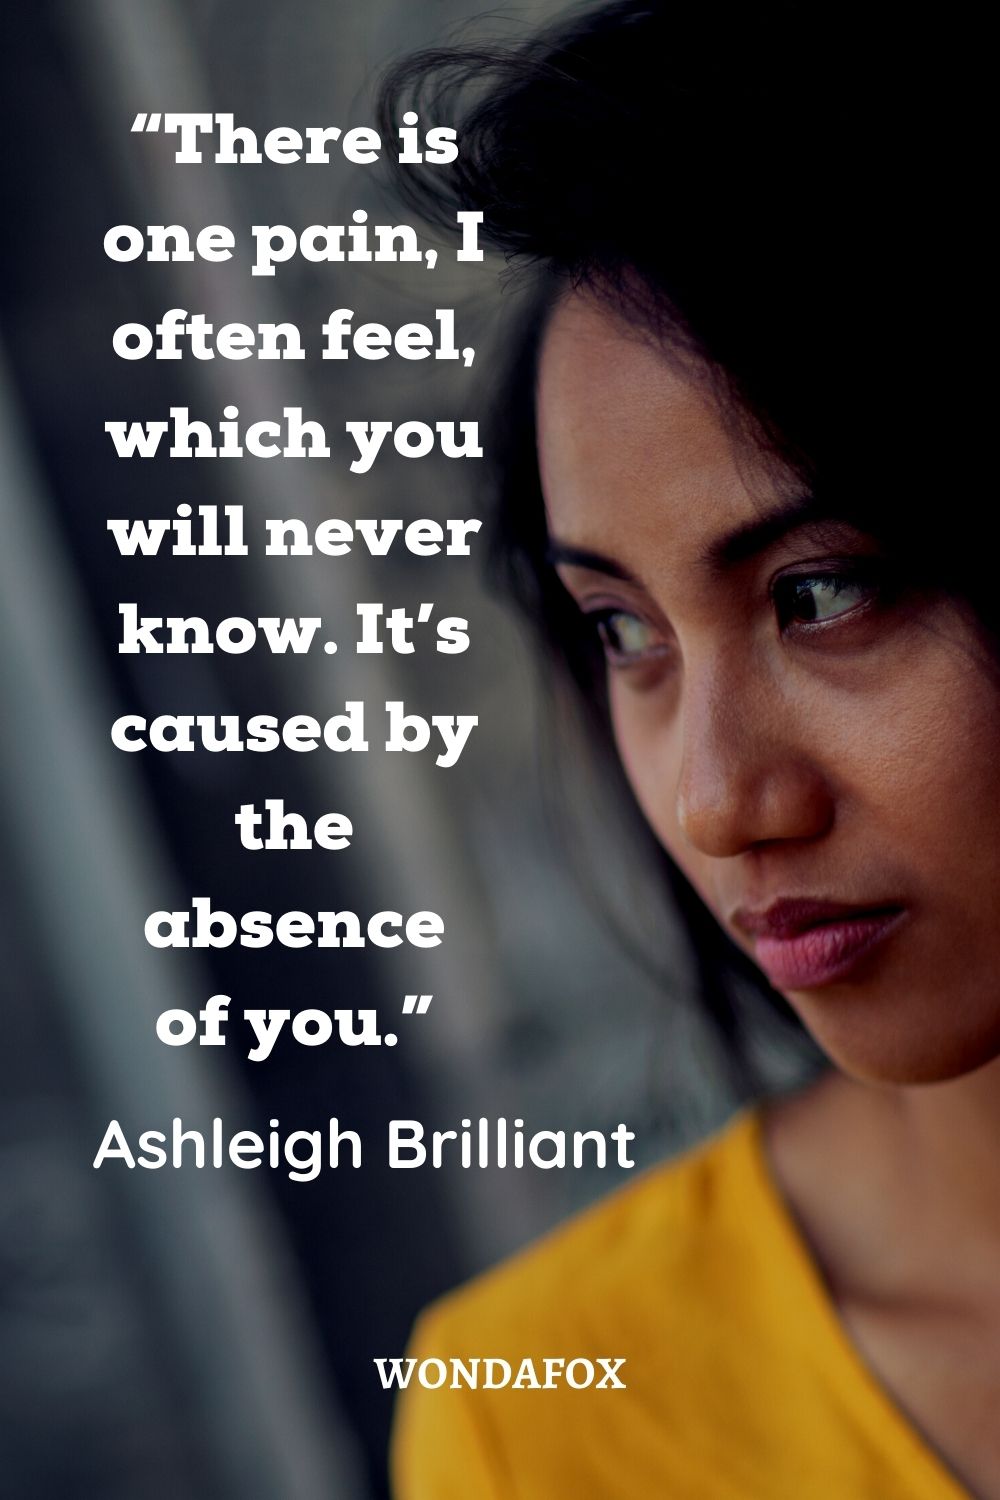  “There is one pain, I often feel, which you will never know. It’s caused by the absence of you.”
Ashleigh Brilliant